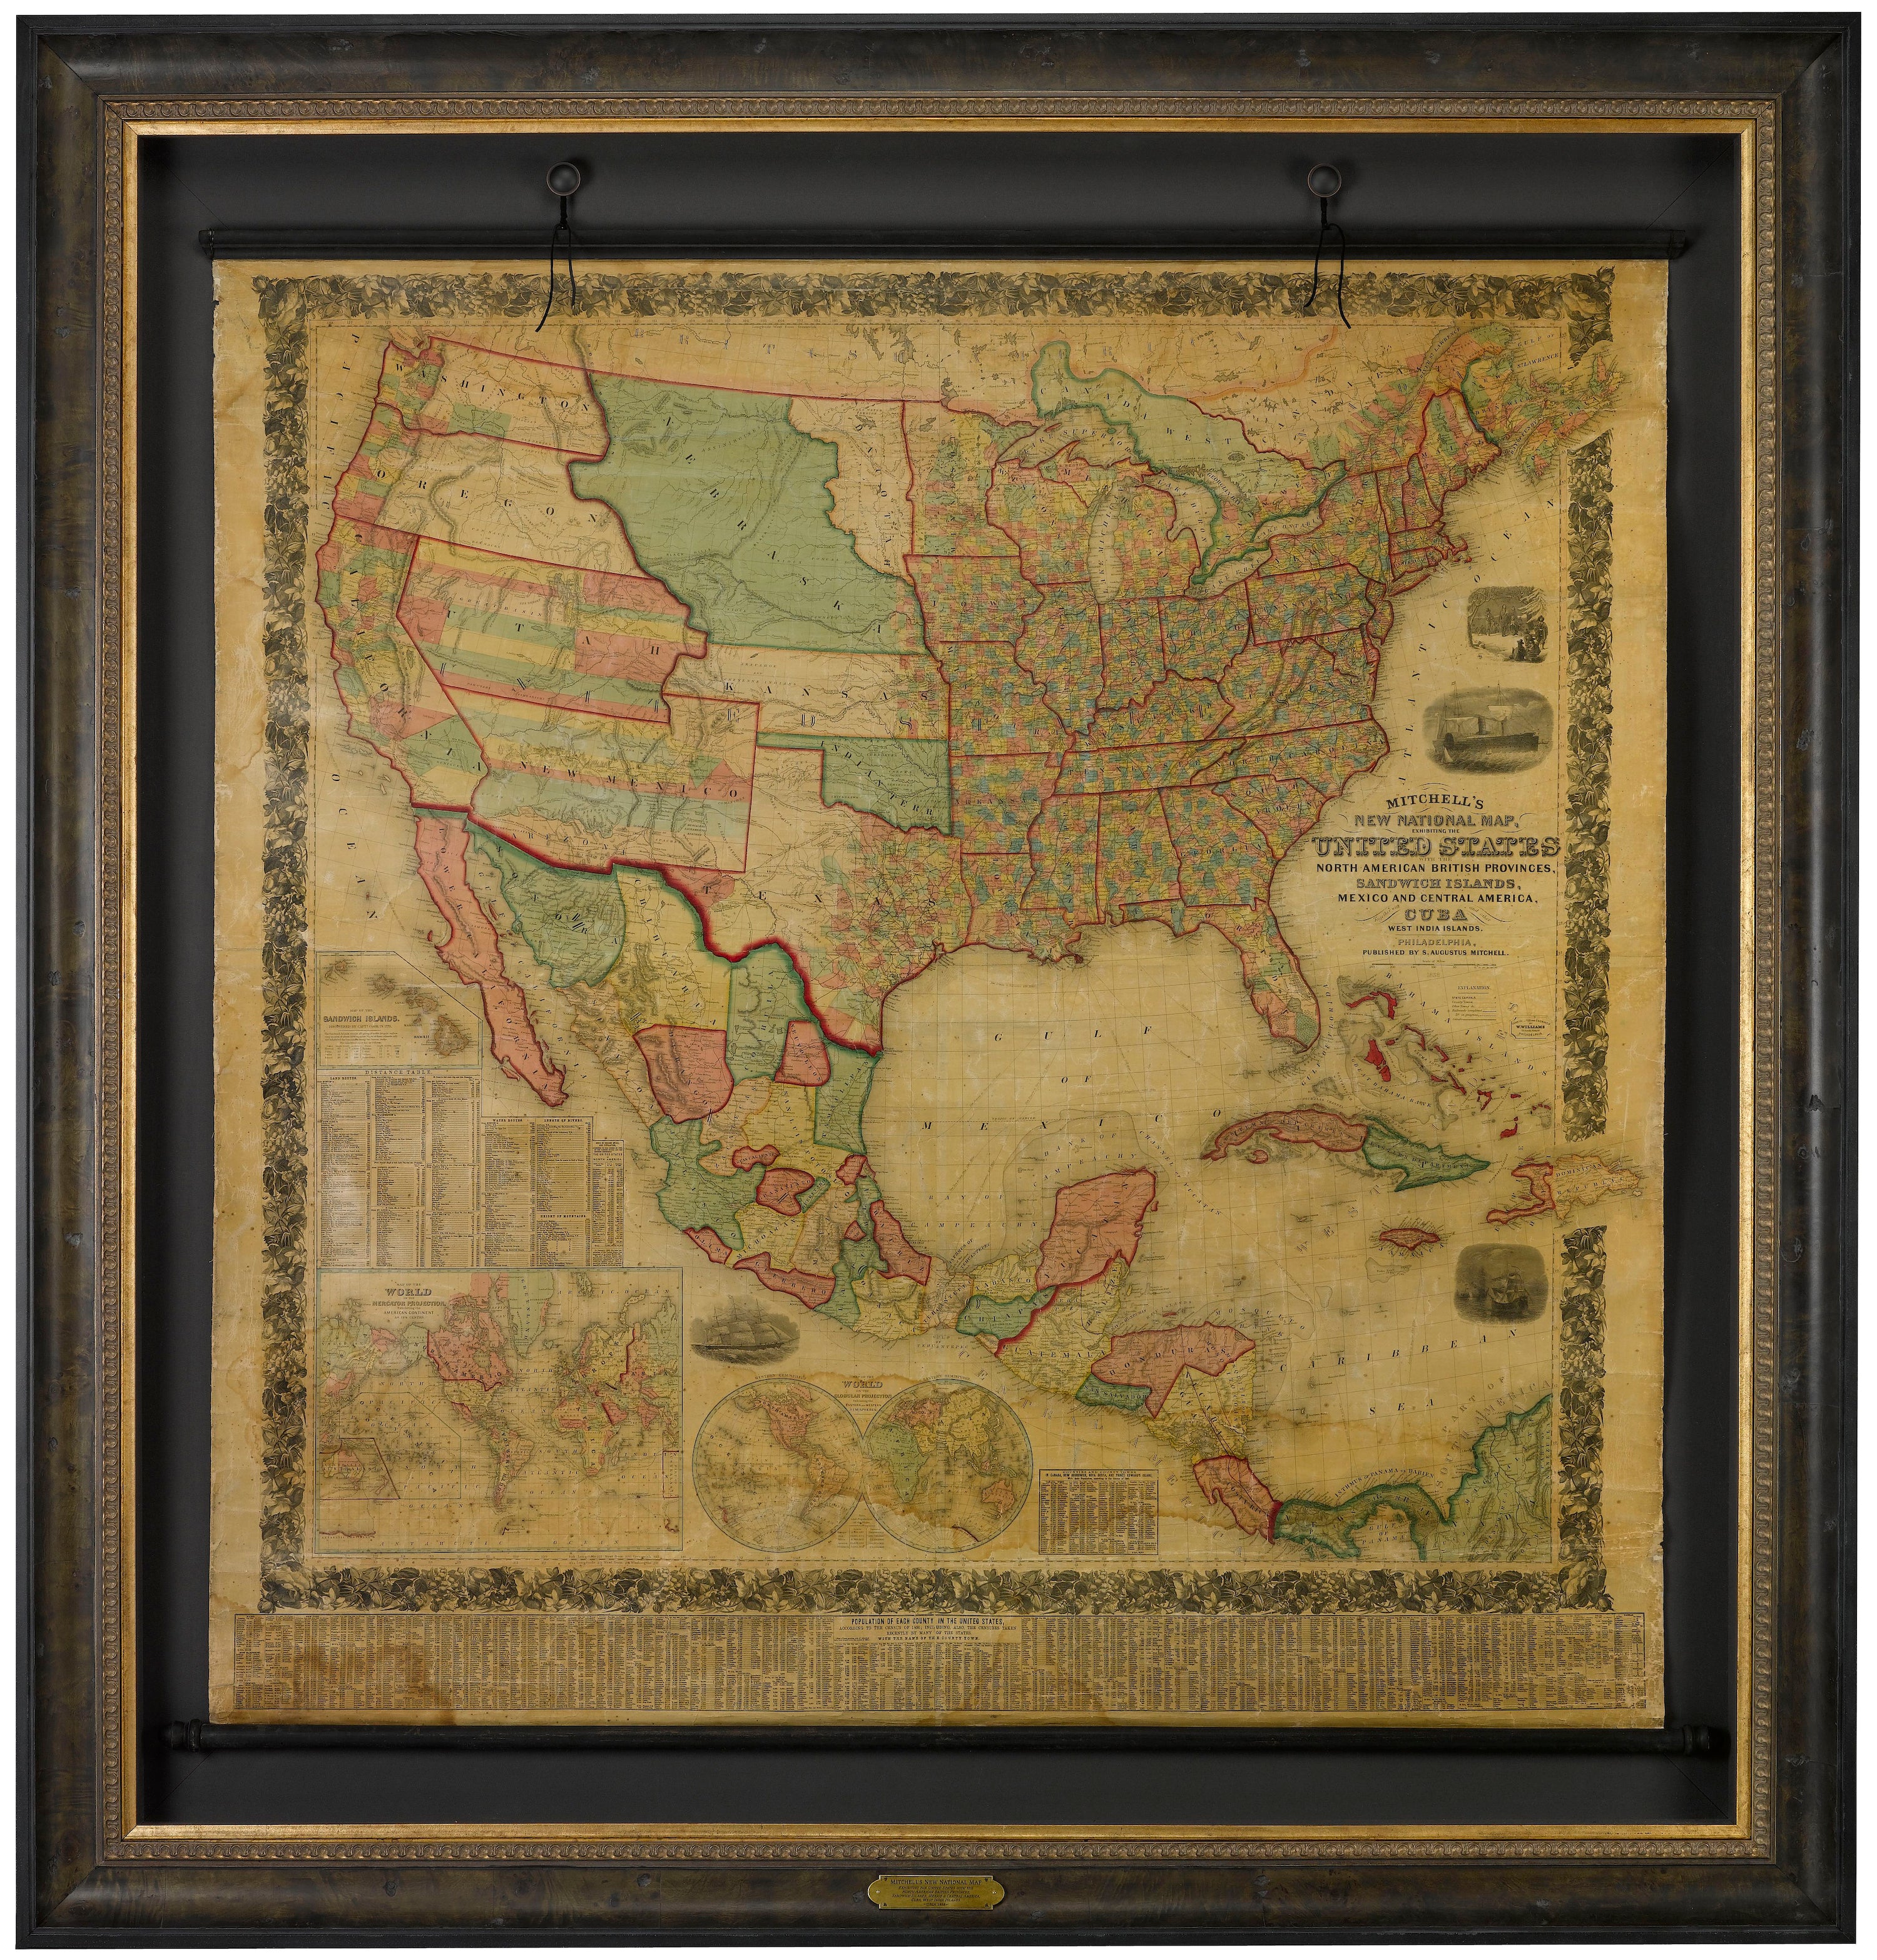 1858 Mitchell’s Map of the United States - A Snapshot in History